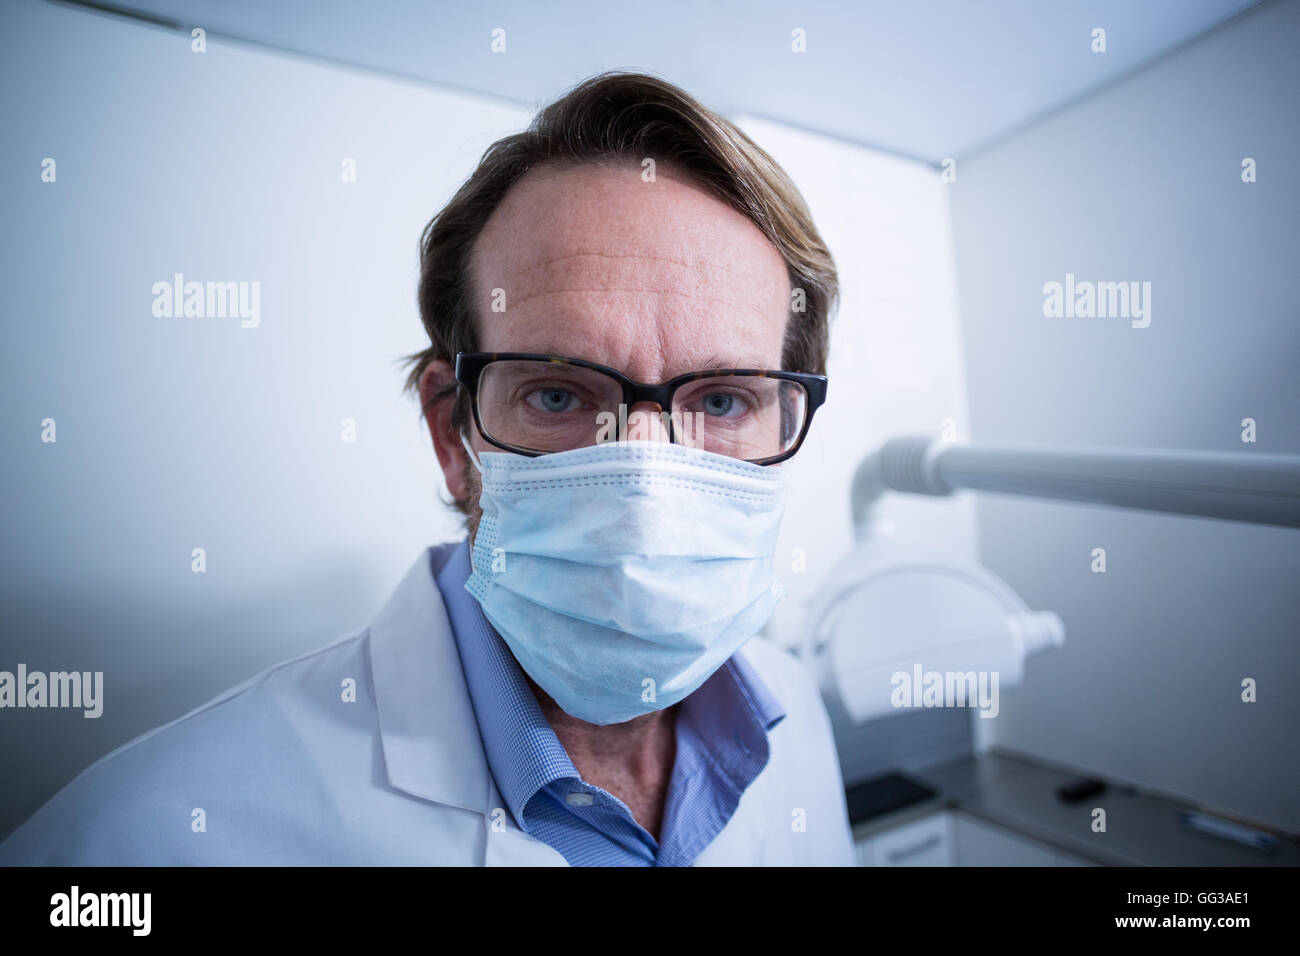 Portrait of dentist wearing surgical mask Stock Photo